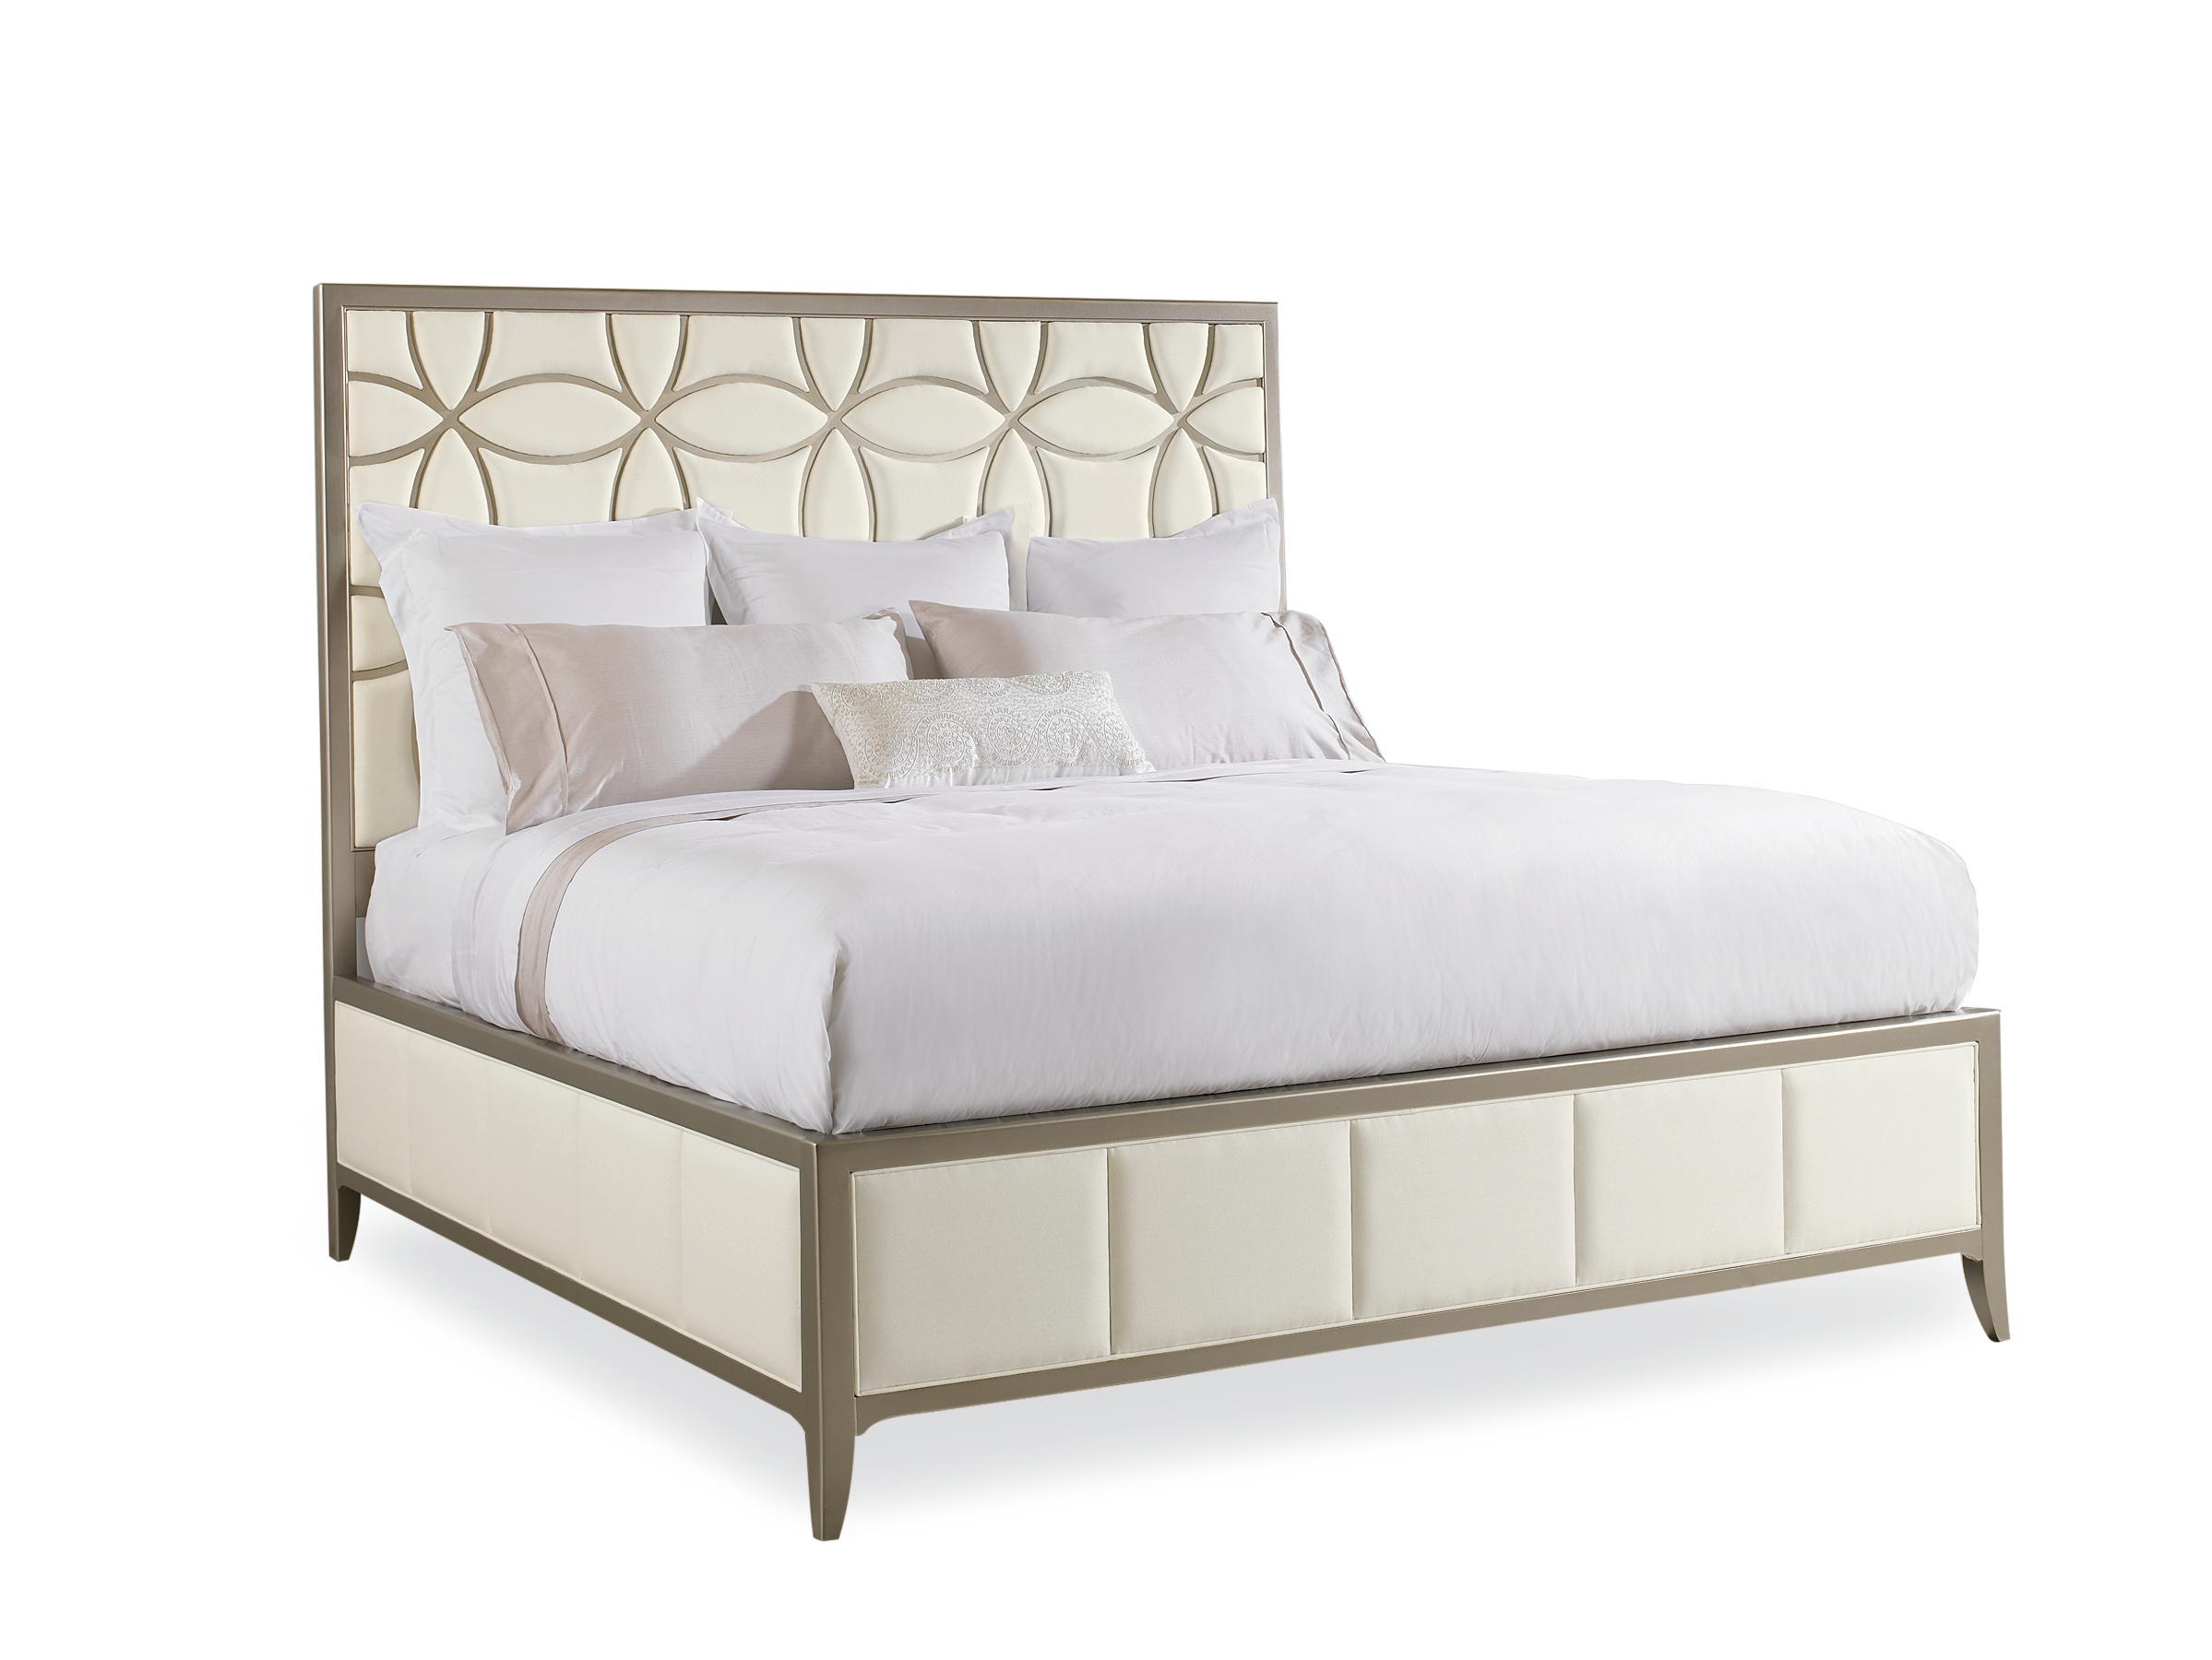 

    
Trellis Pattern Headboard White & Taupe Finish Queen Bed Set 3Pcs SLEEPING BEAUTY / BUONA NOTTE by Caracole
